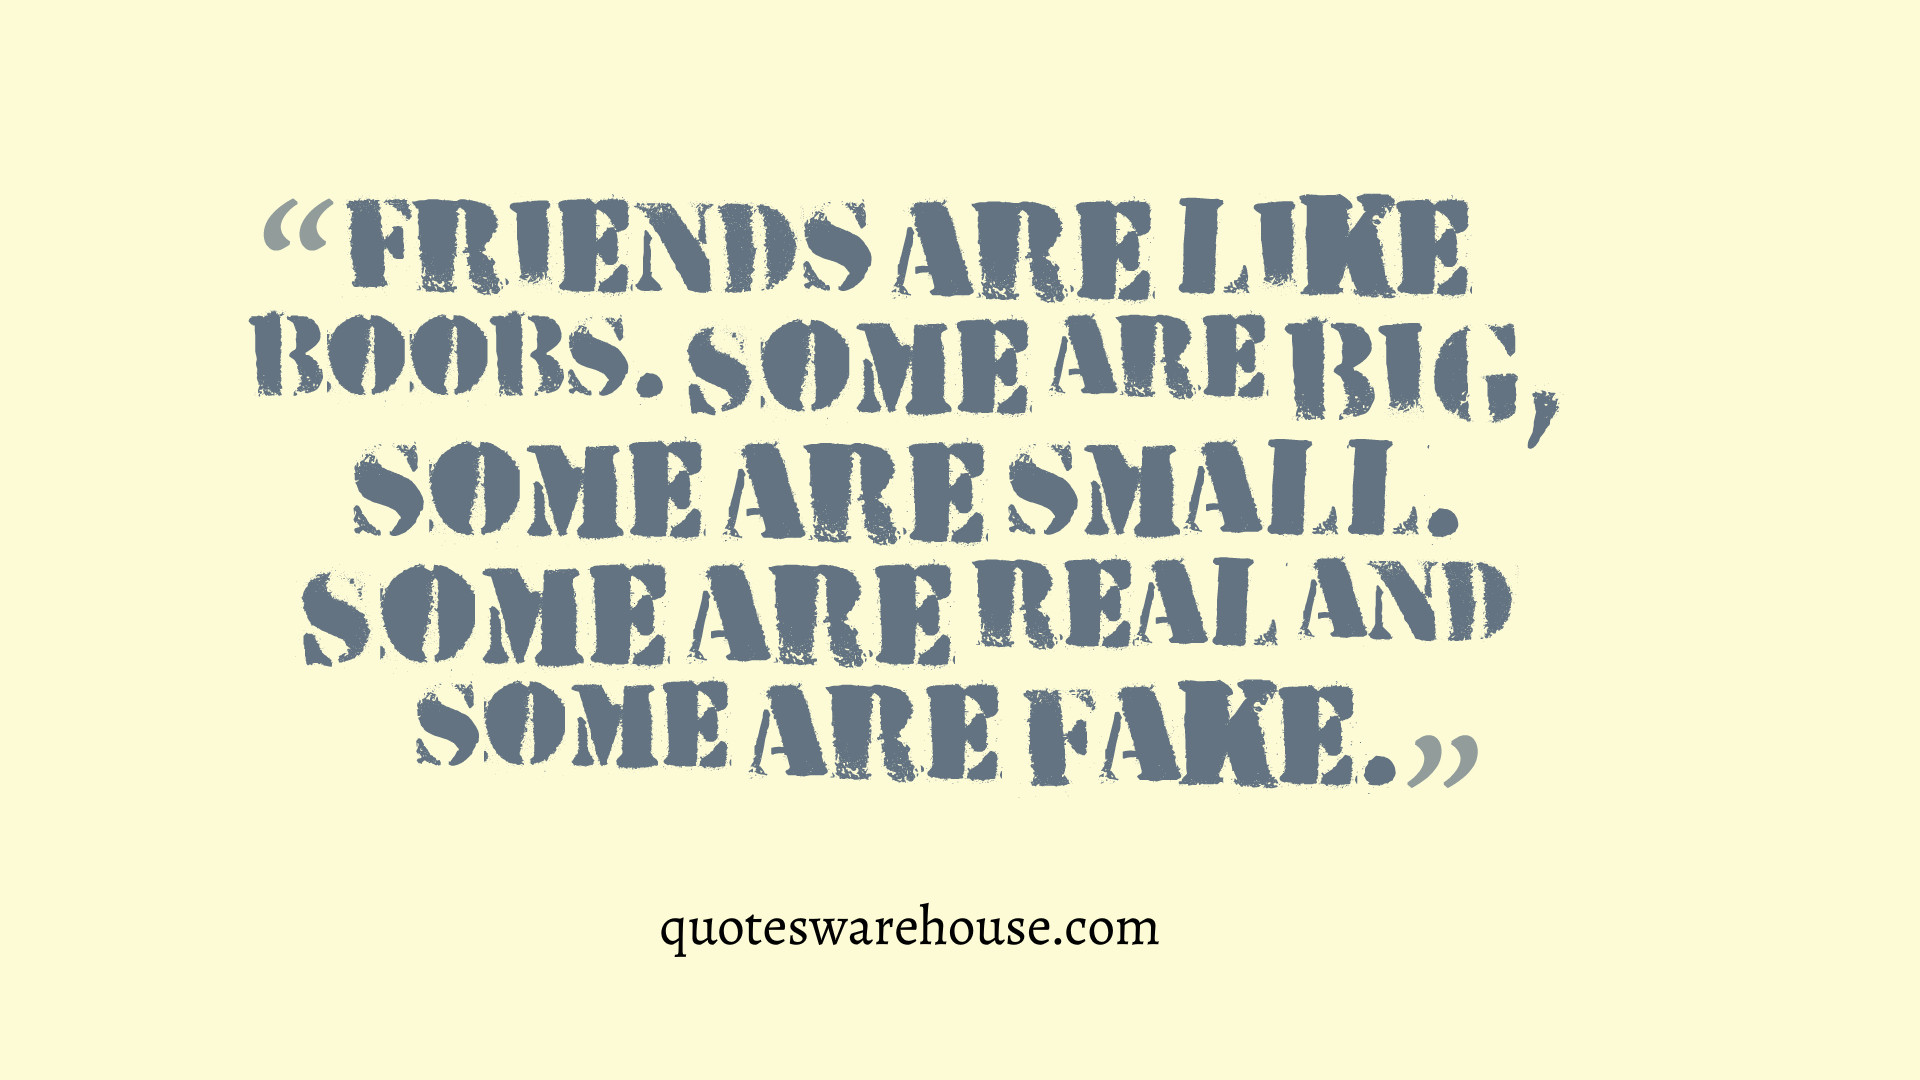 Quotes Bad Friendship
 Bad Friend Quotes And Sayings QuotesGram